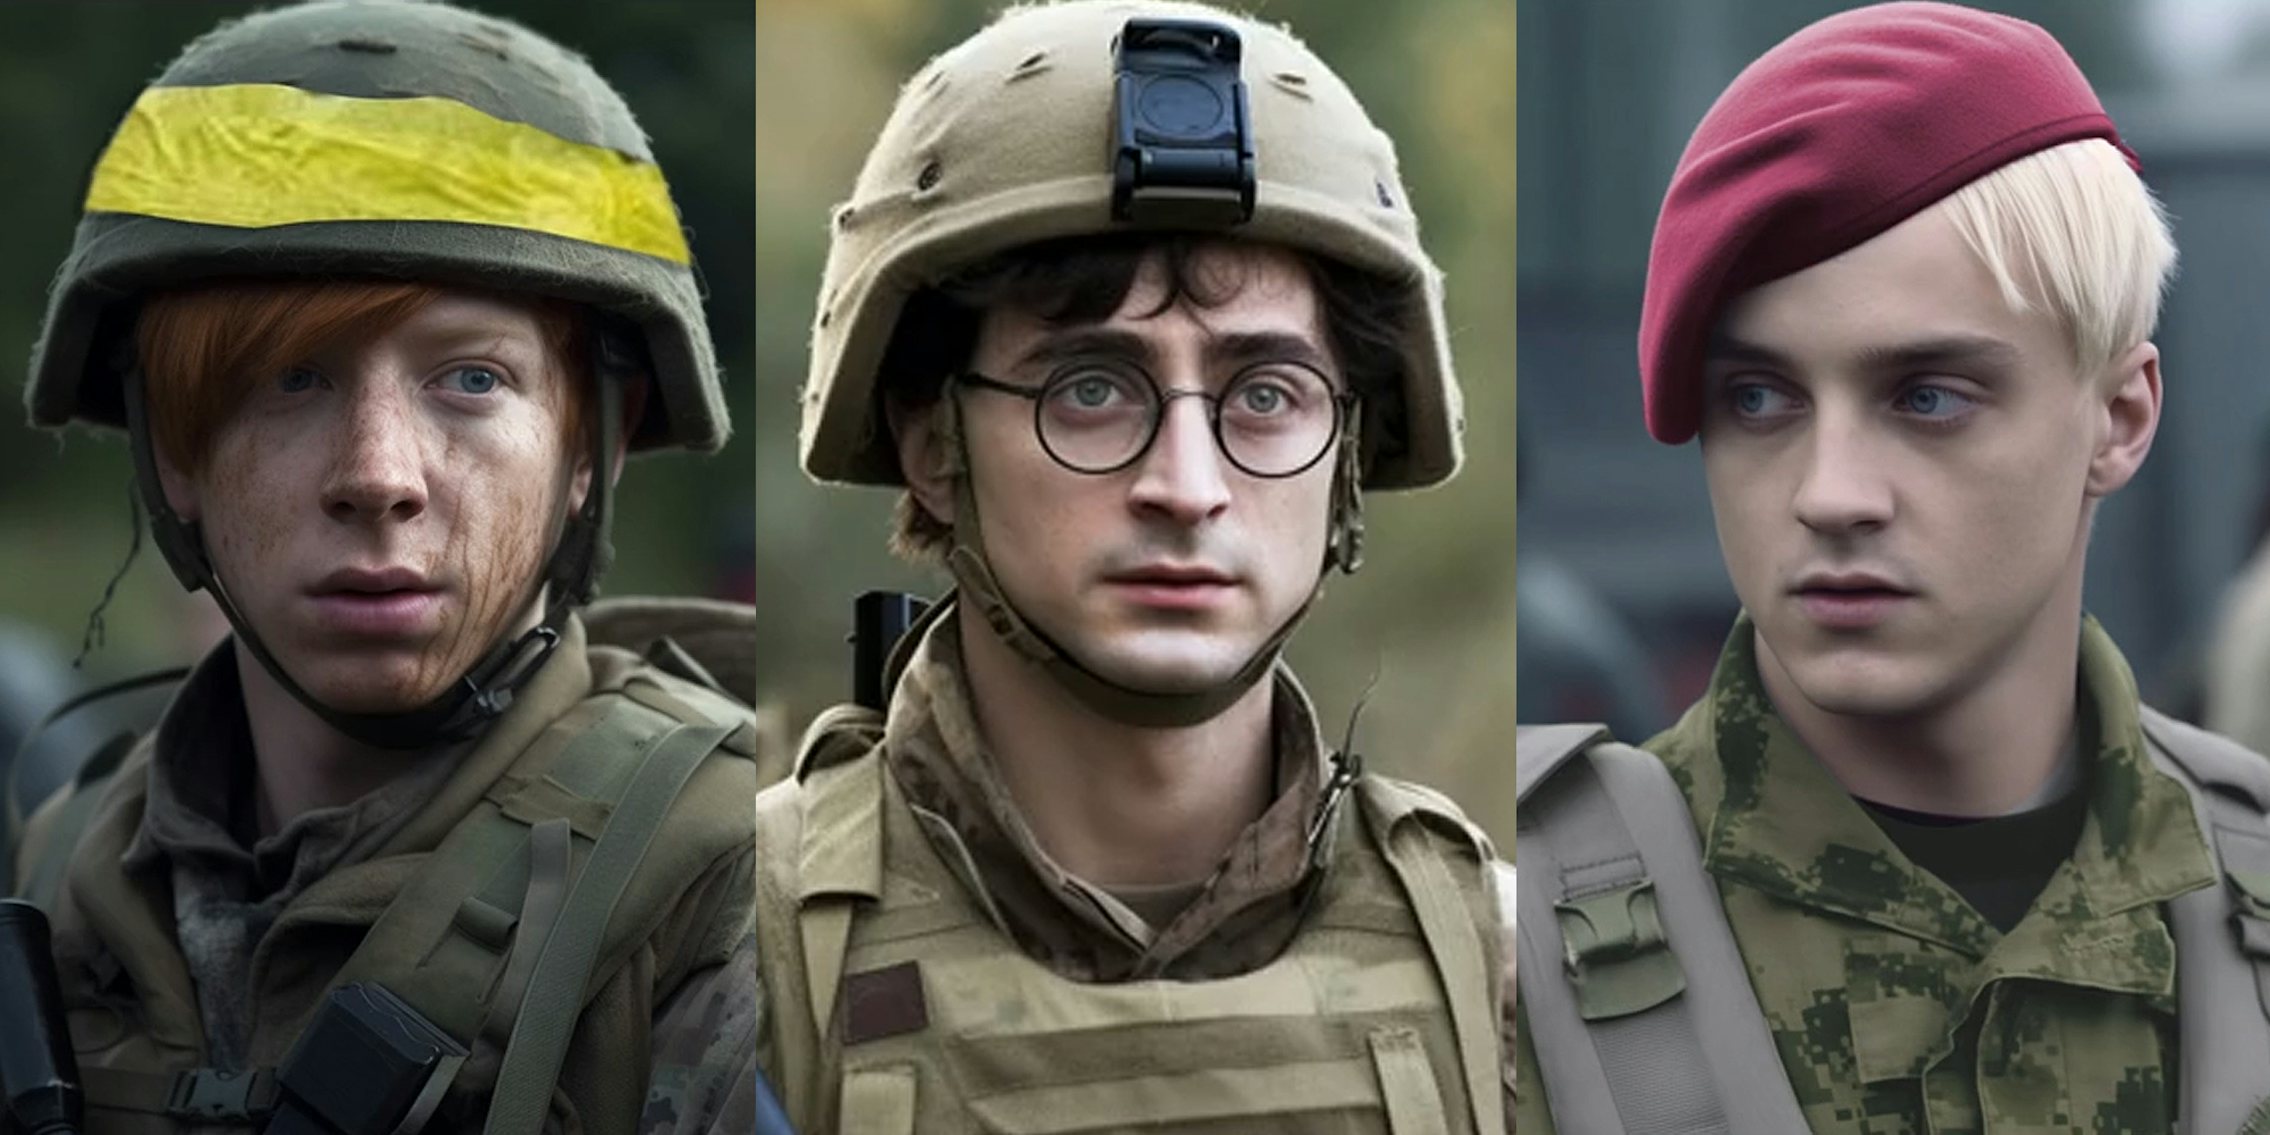 Ronald Weasley from Harry Potter ai military art (l) Harry Potter from Harry Potter ai military art (c) Draco Malfoy from Harry Potter ai military art (r)